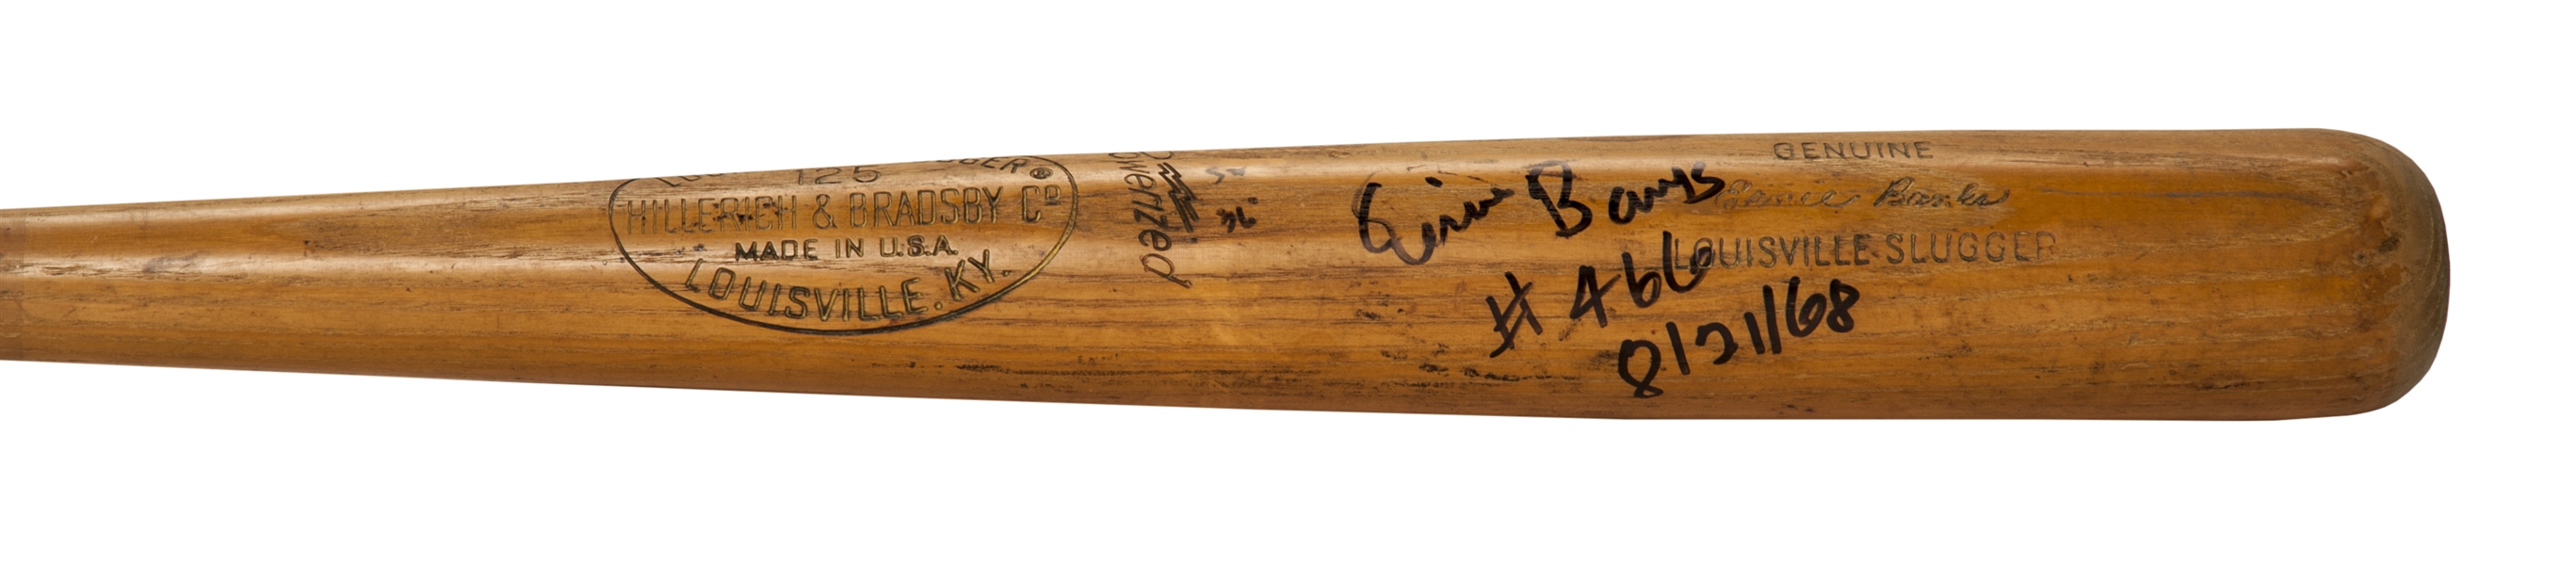 1965-68 Ernie Banks Game Used and Signed H+B  S2 Model Bat Used to Hit Career Home Run # 466 (PSA/DNA GU 9.5) Pappas Letter